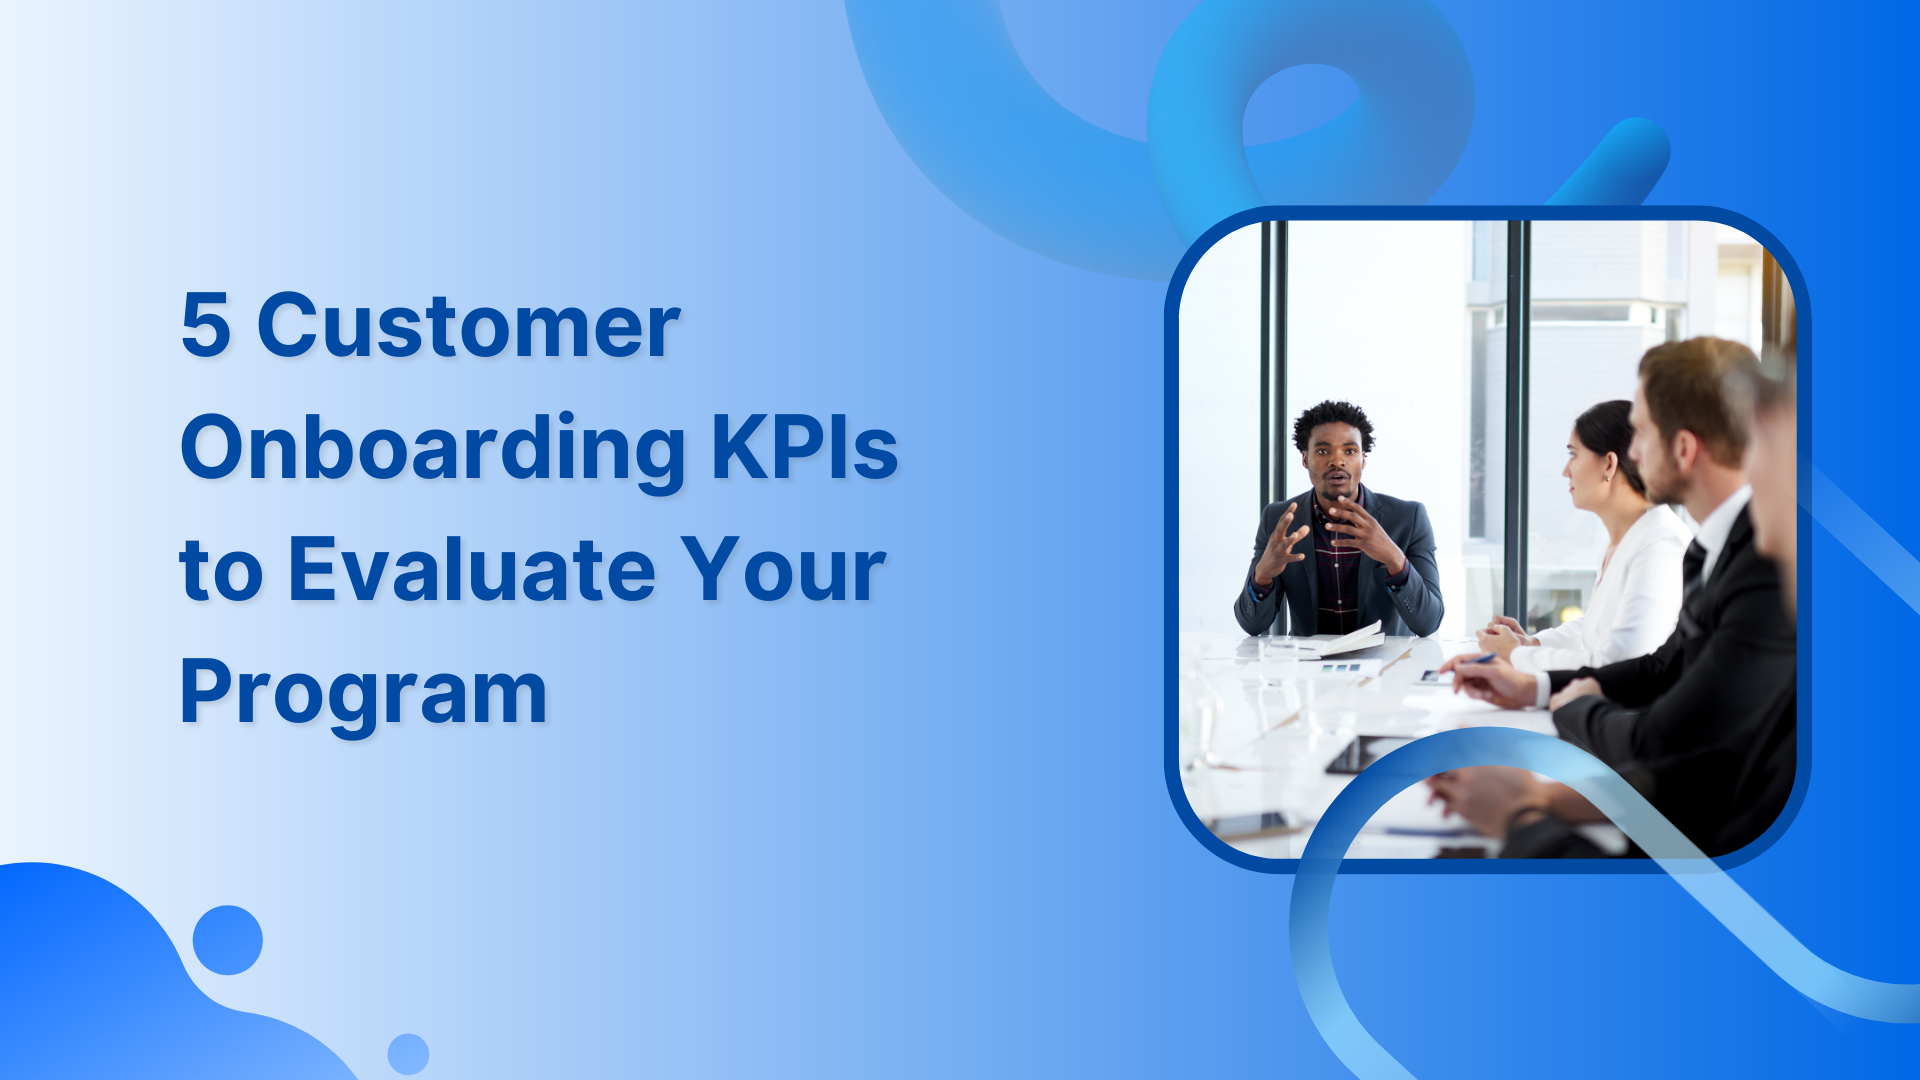 5 Customer Onboarding KPIs to Evaluate Your Program